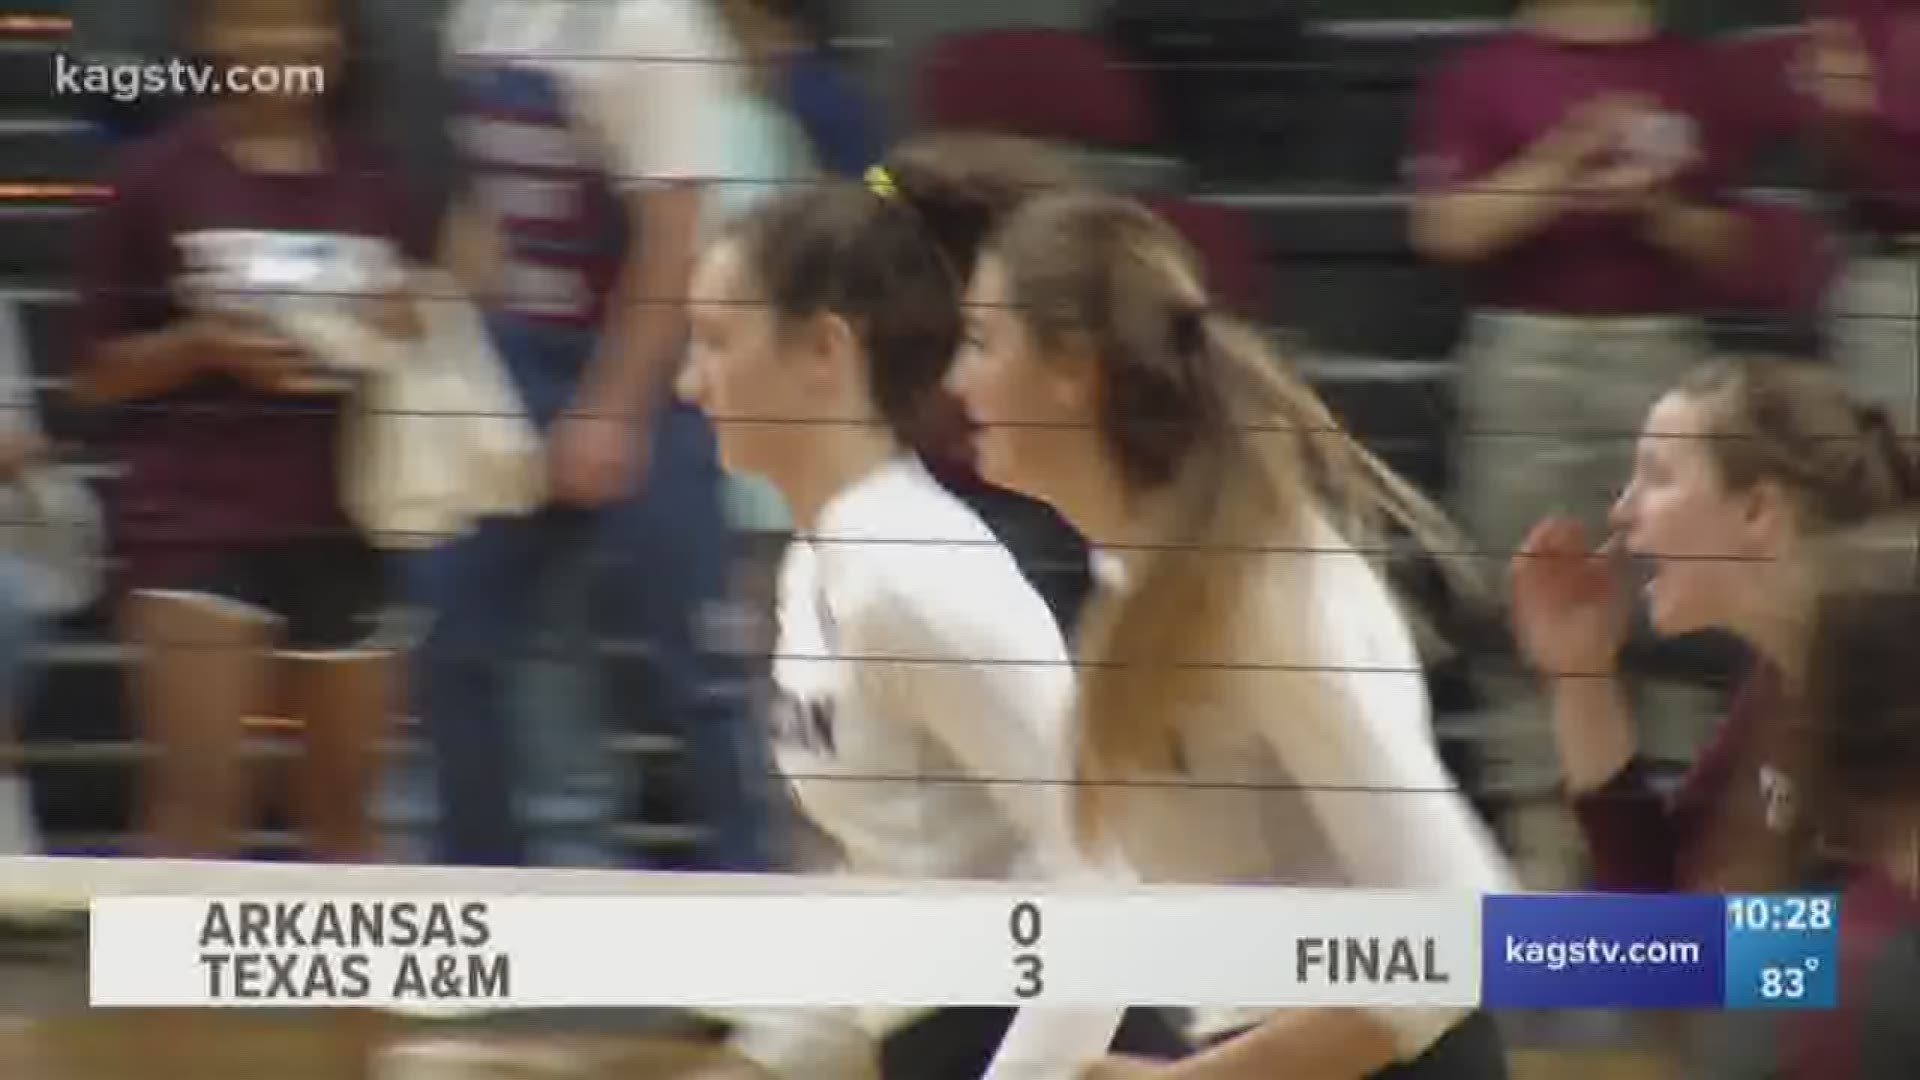 Aggie volleyball takes down Arkansas 3-0 to open SEC play in style.